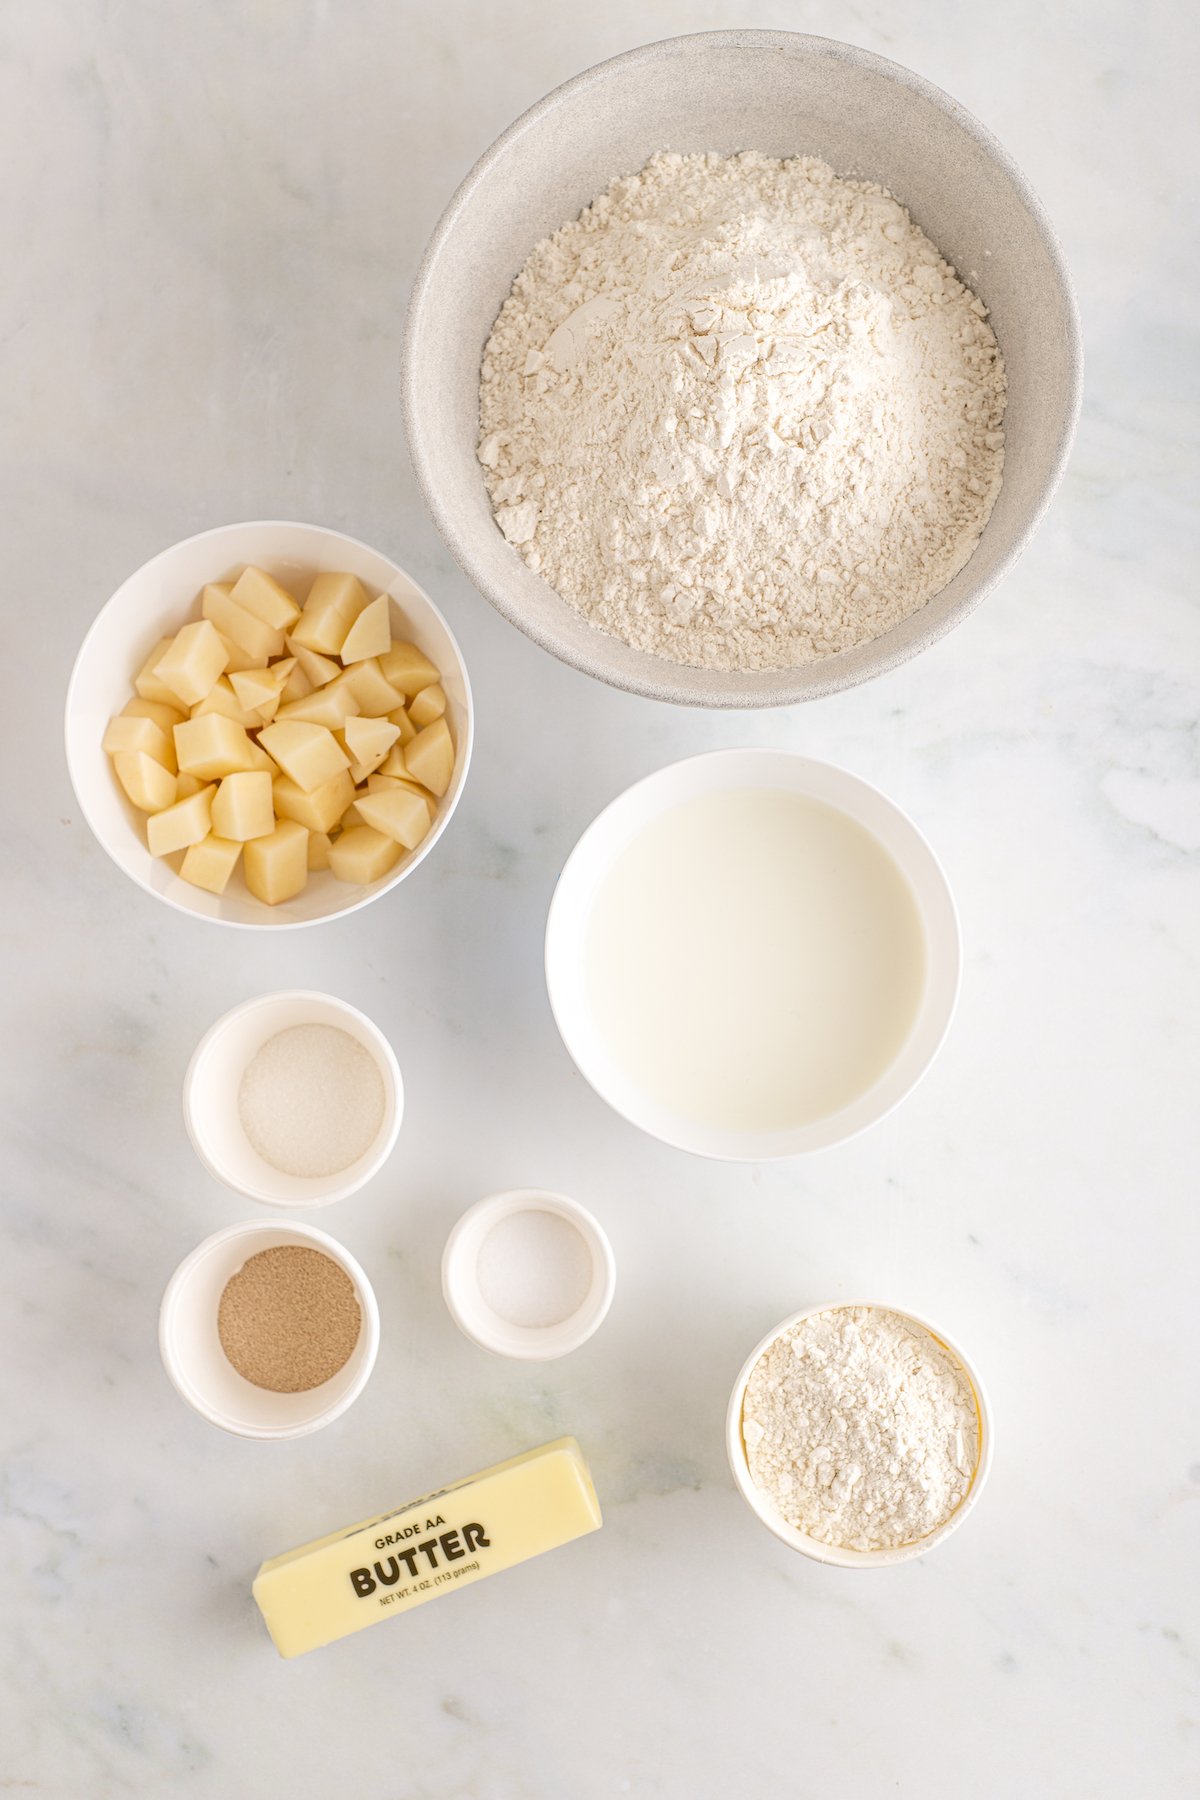 Bread ingredients measured and arranged on a work surface.